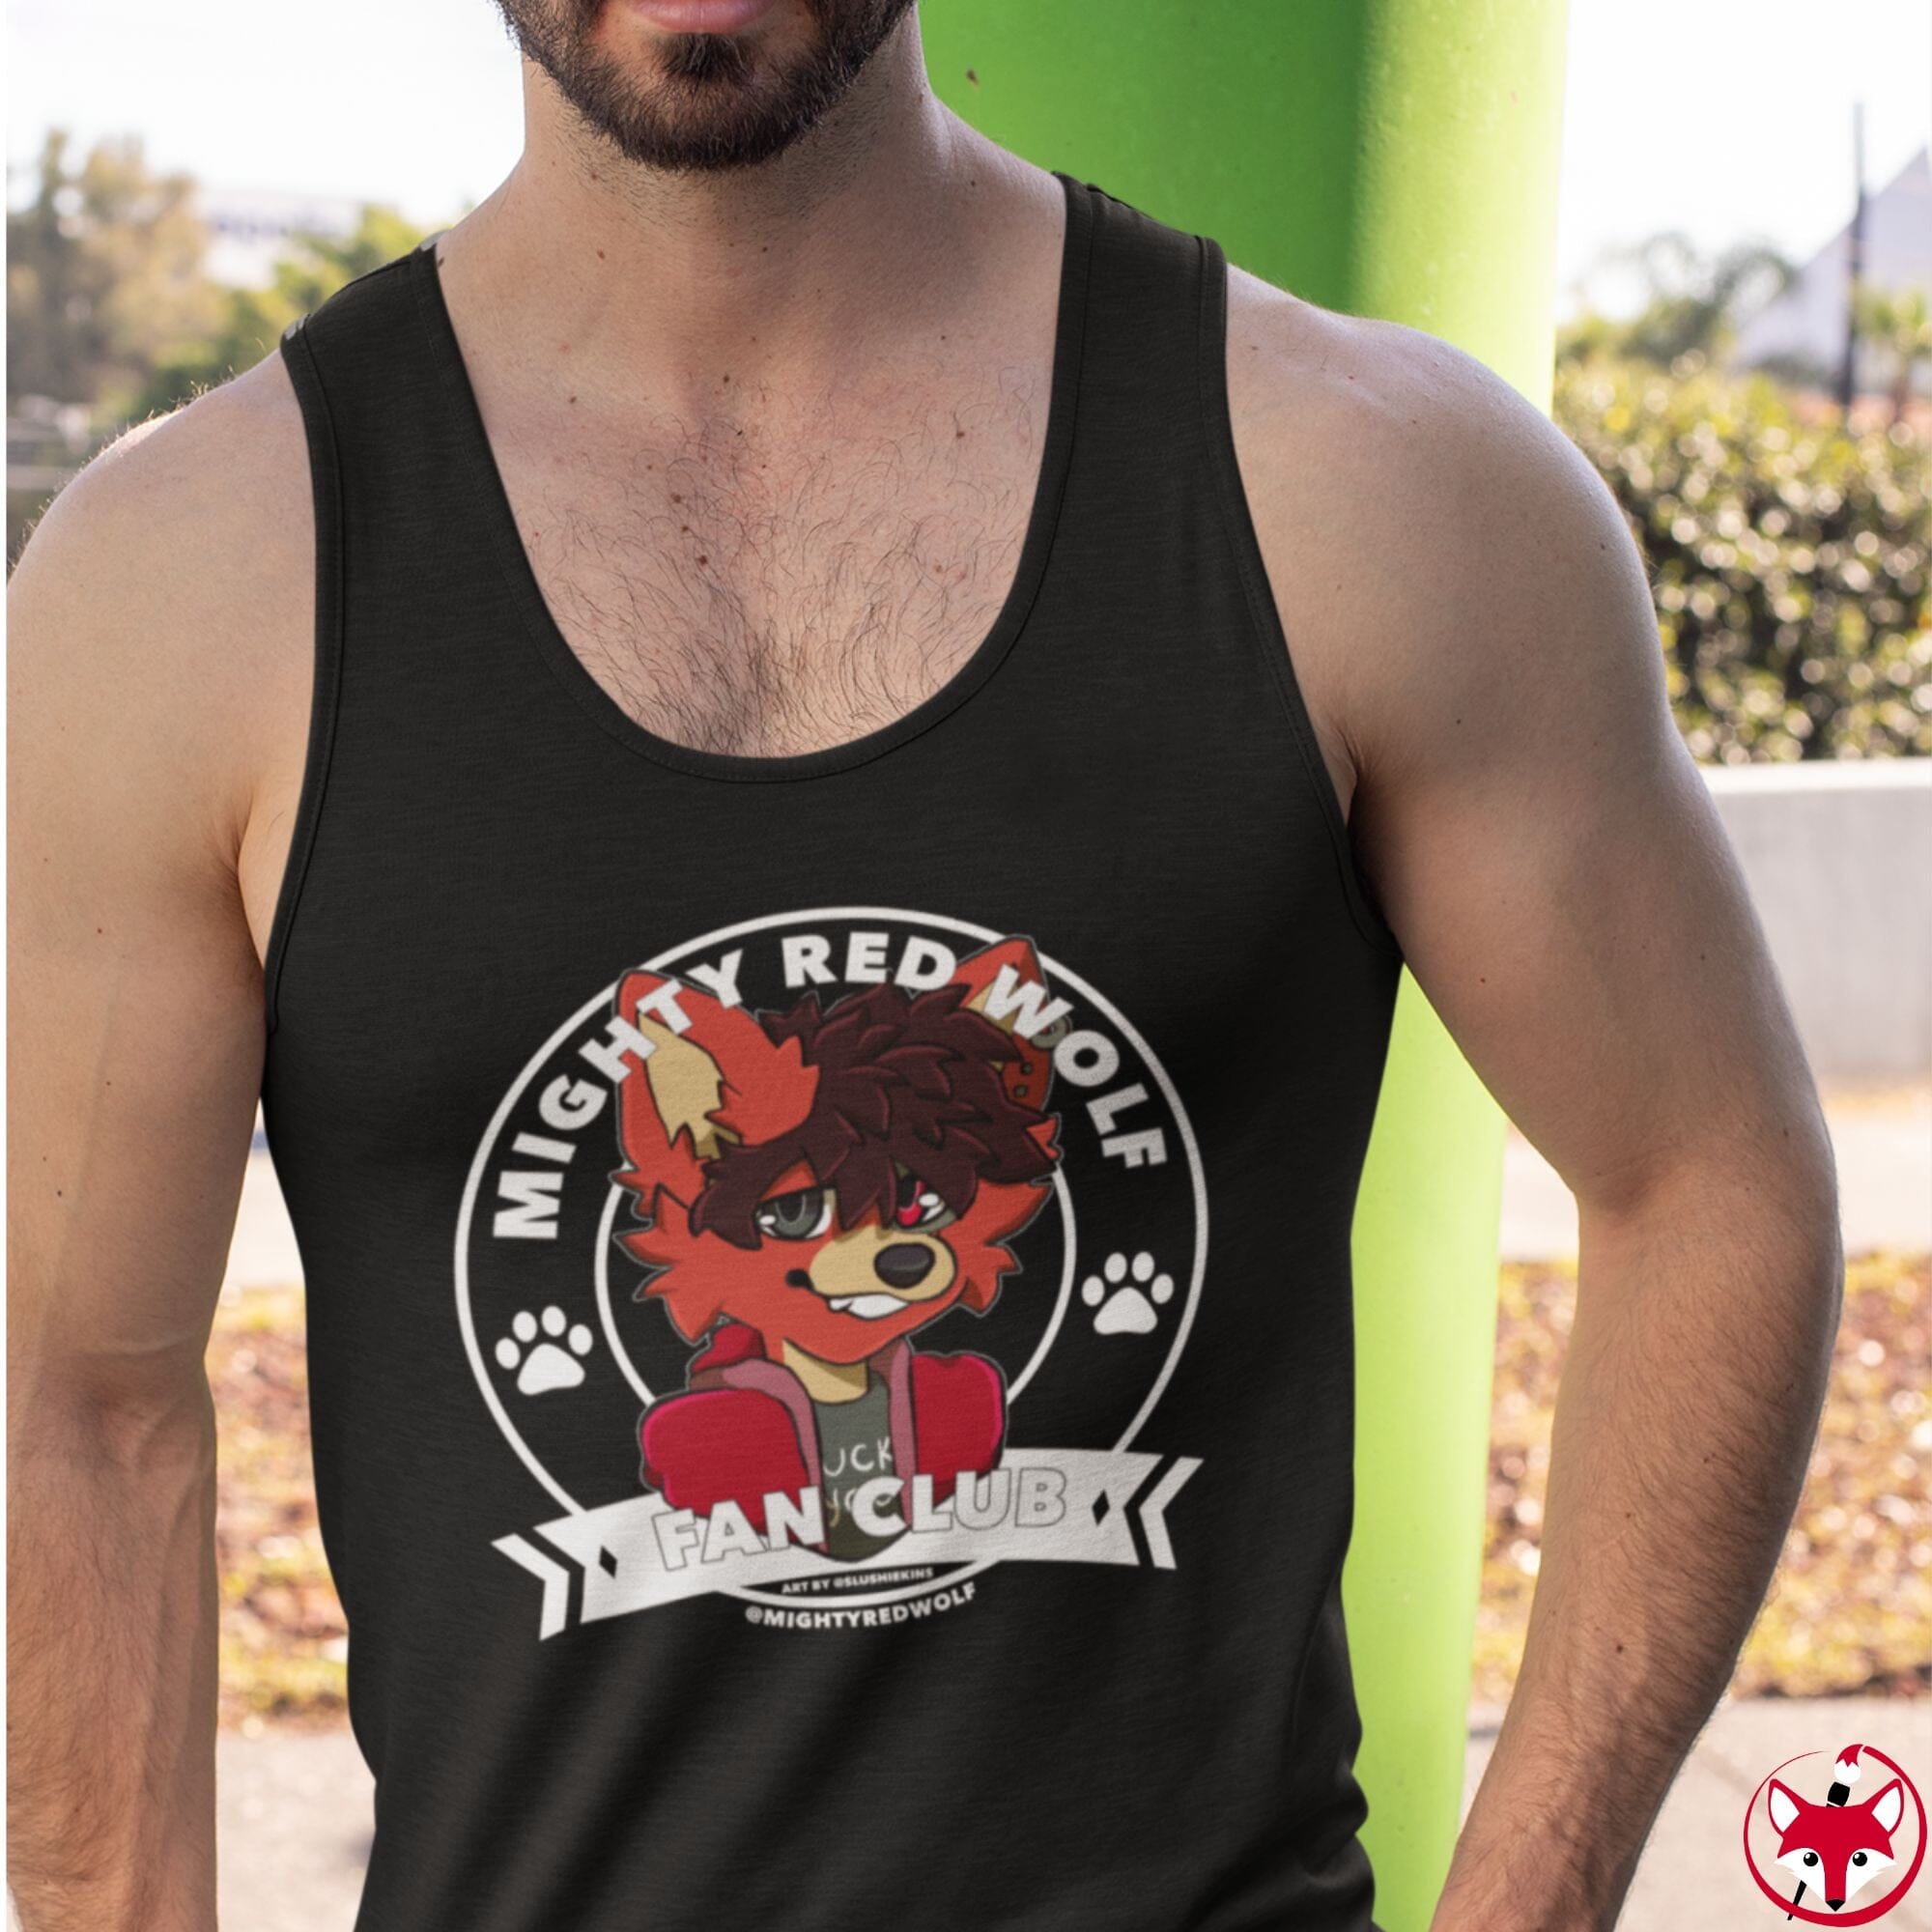 MRW Fanclub - Tank Top Tank Top AFLT-Mighty-Red 